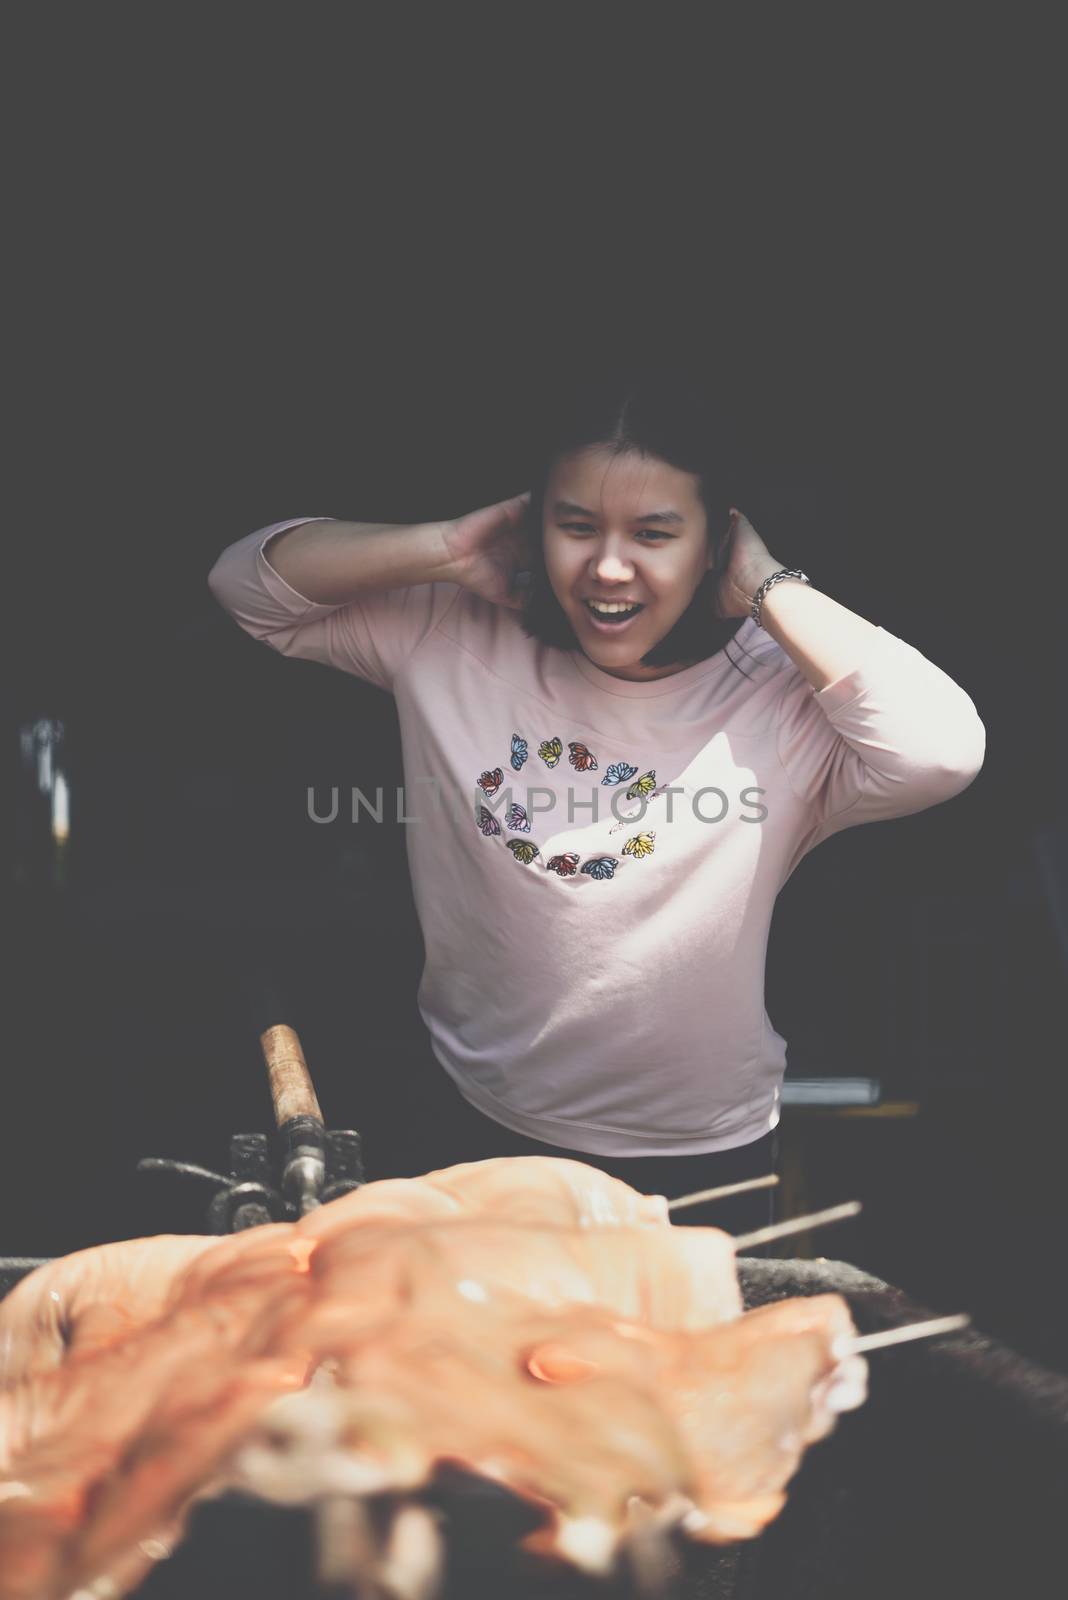 Asian woman chef cooking Barbecued Suckling Pig by roasting pork on charcoal for sale at Thai street food market or restaurant in Thailand